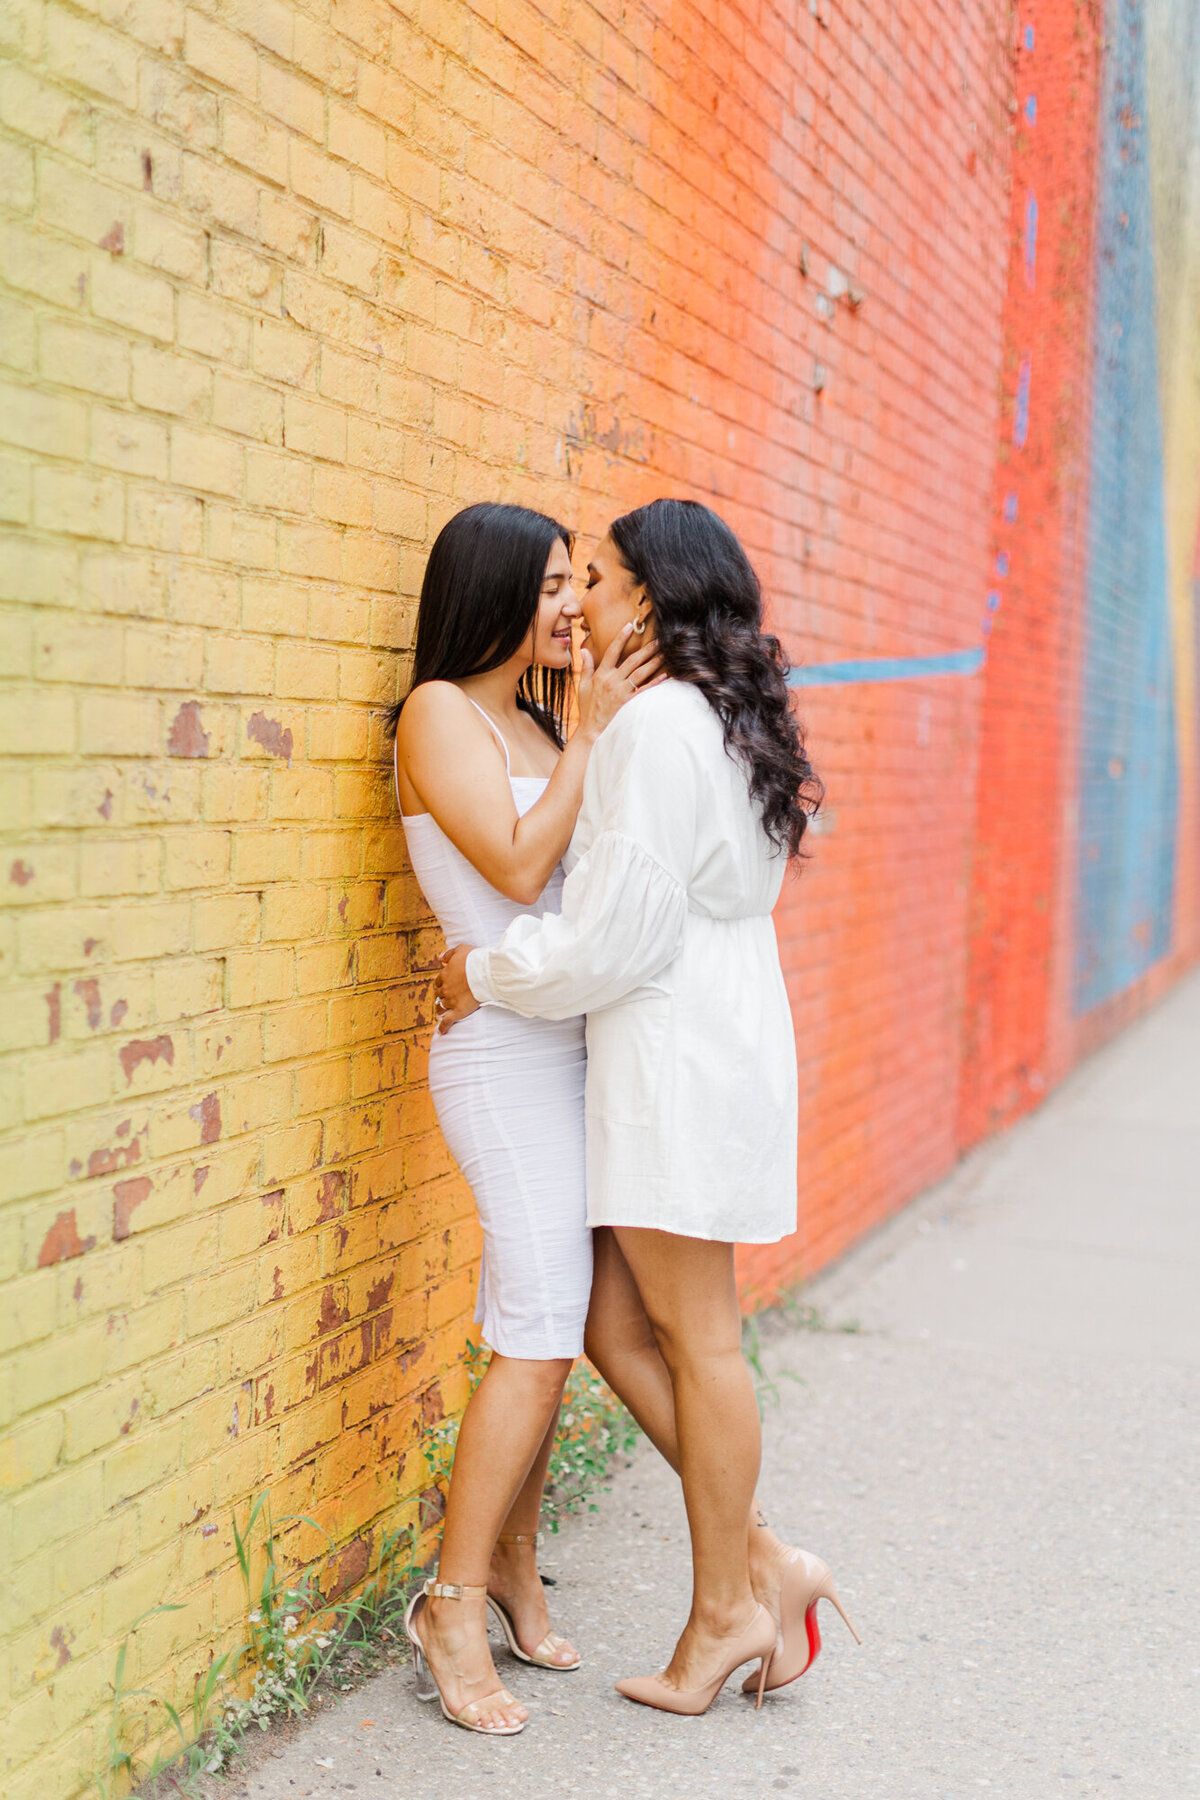 LeilanySteph_Engagement_61_2021_MB_5727